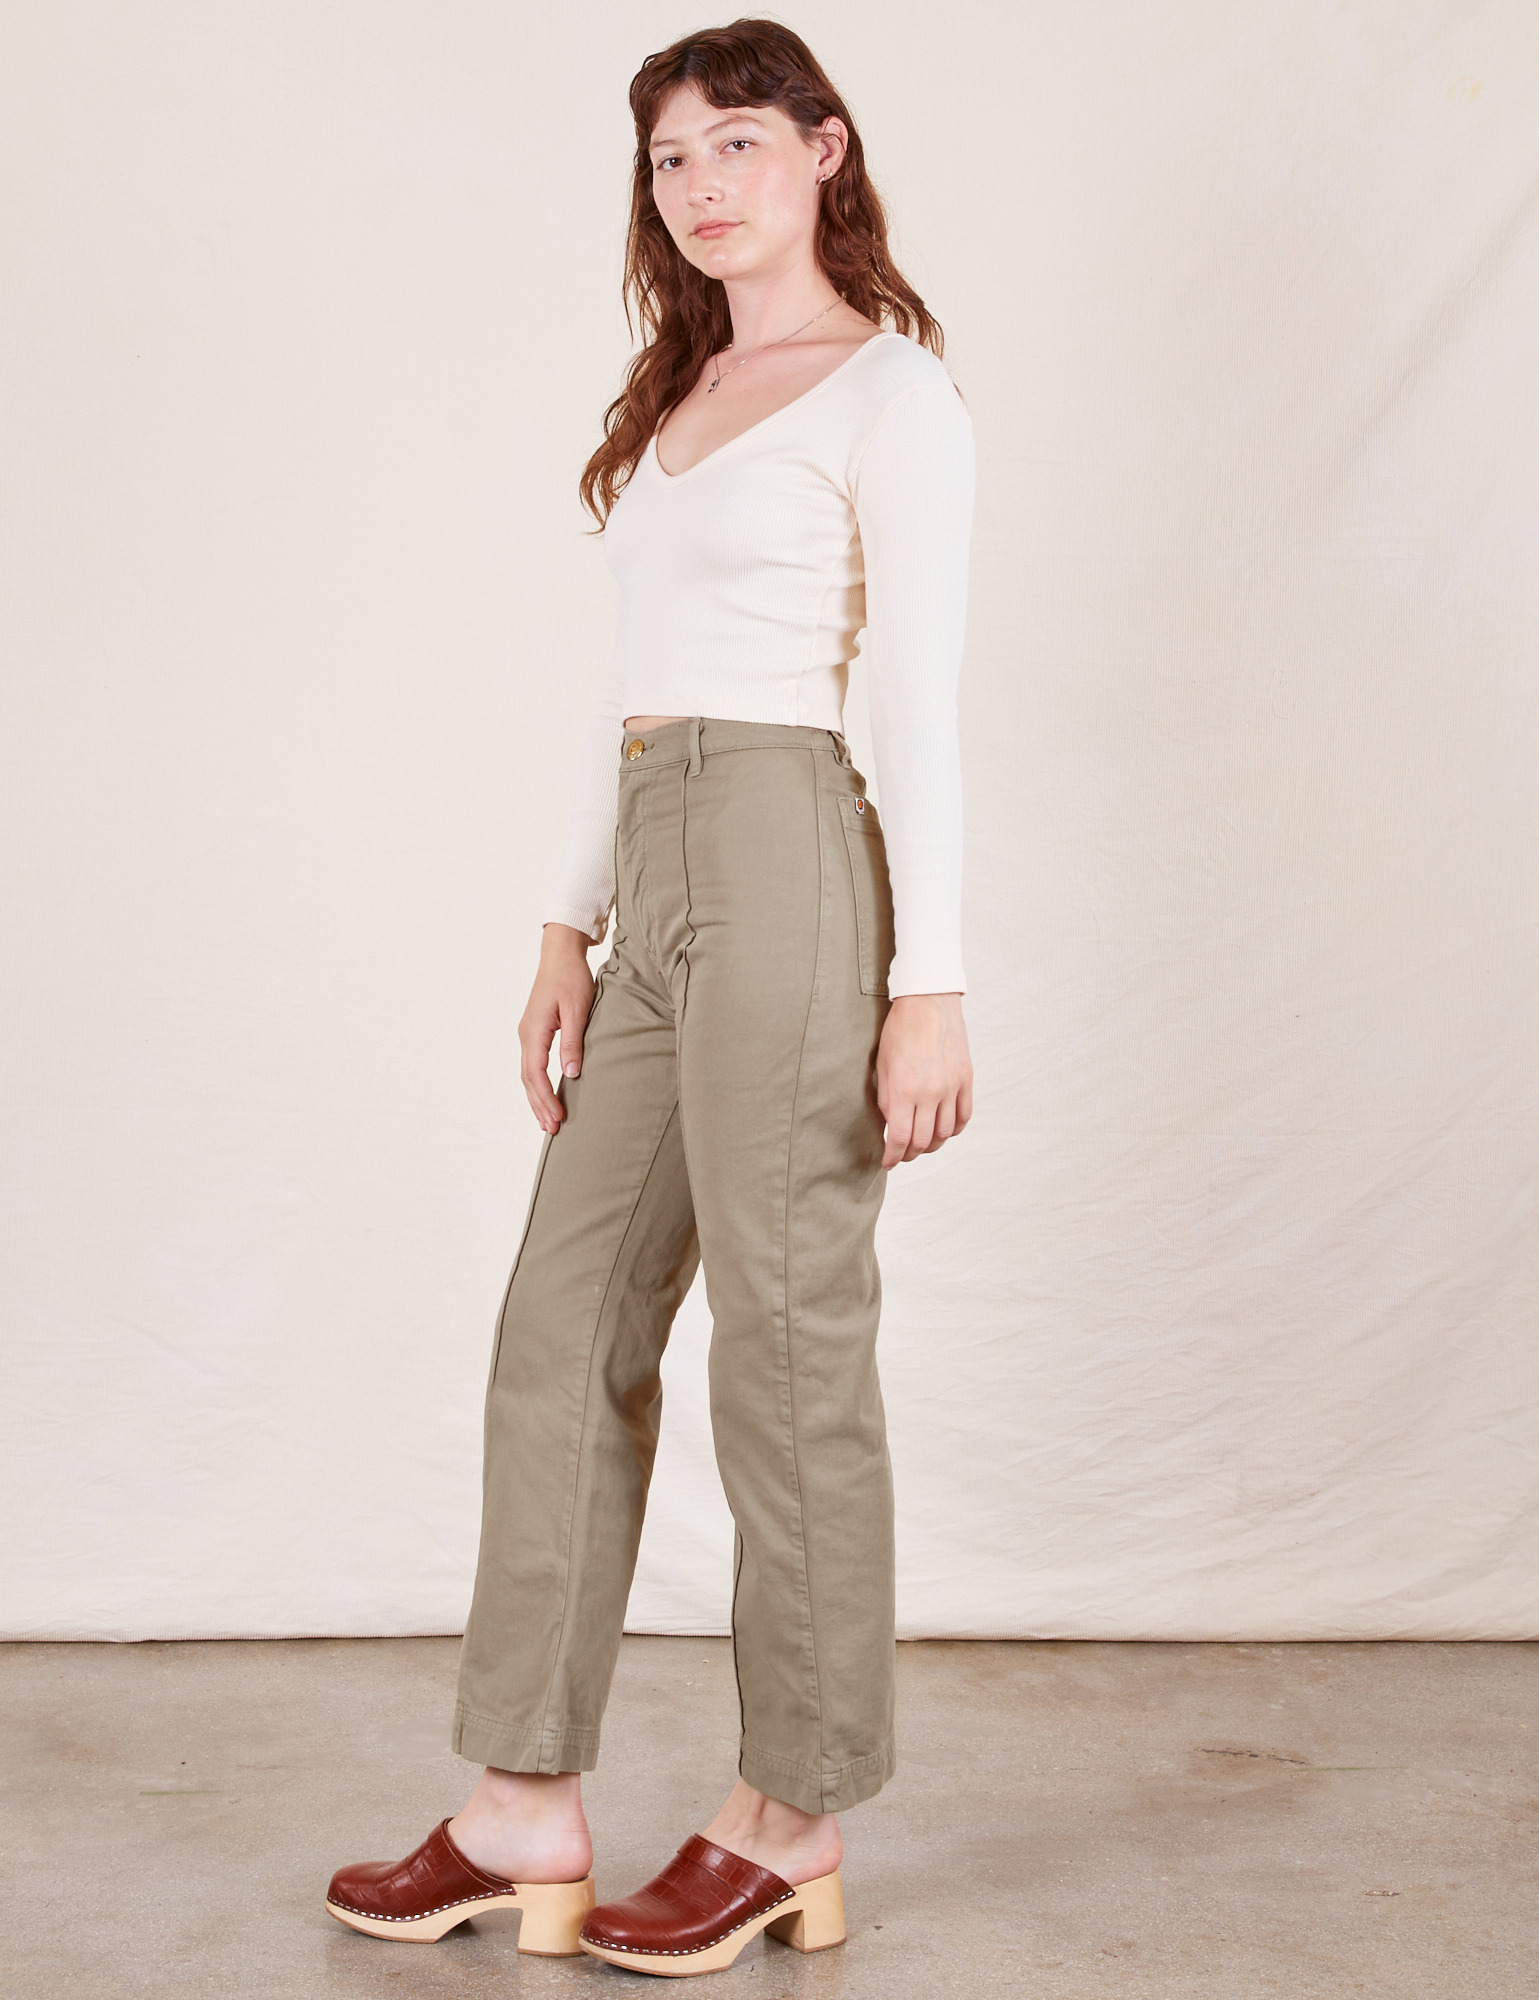 Alex is 5&#39;8&quot; and wearing XS Western Pants in Khaki Grey paired with a vintage off-white Long Sleeve V-Neck Tee